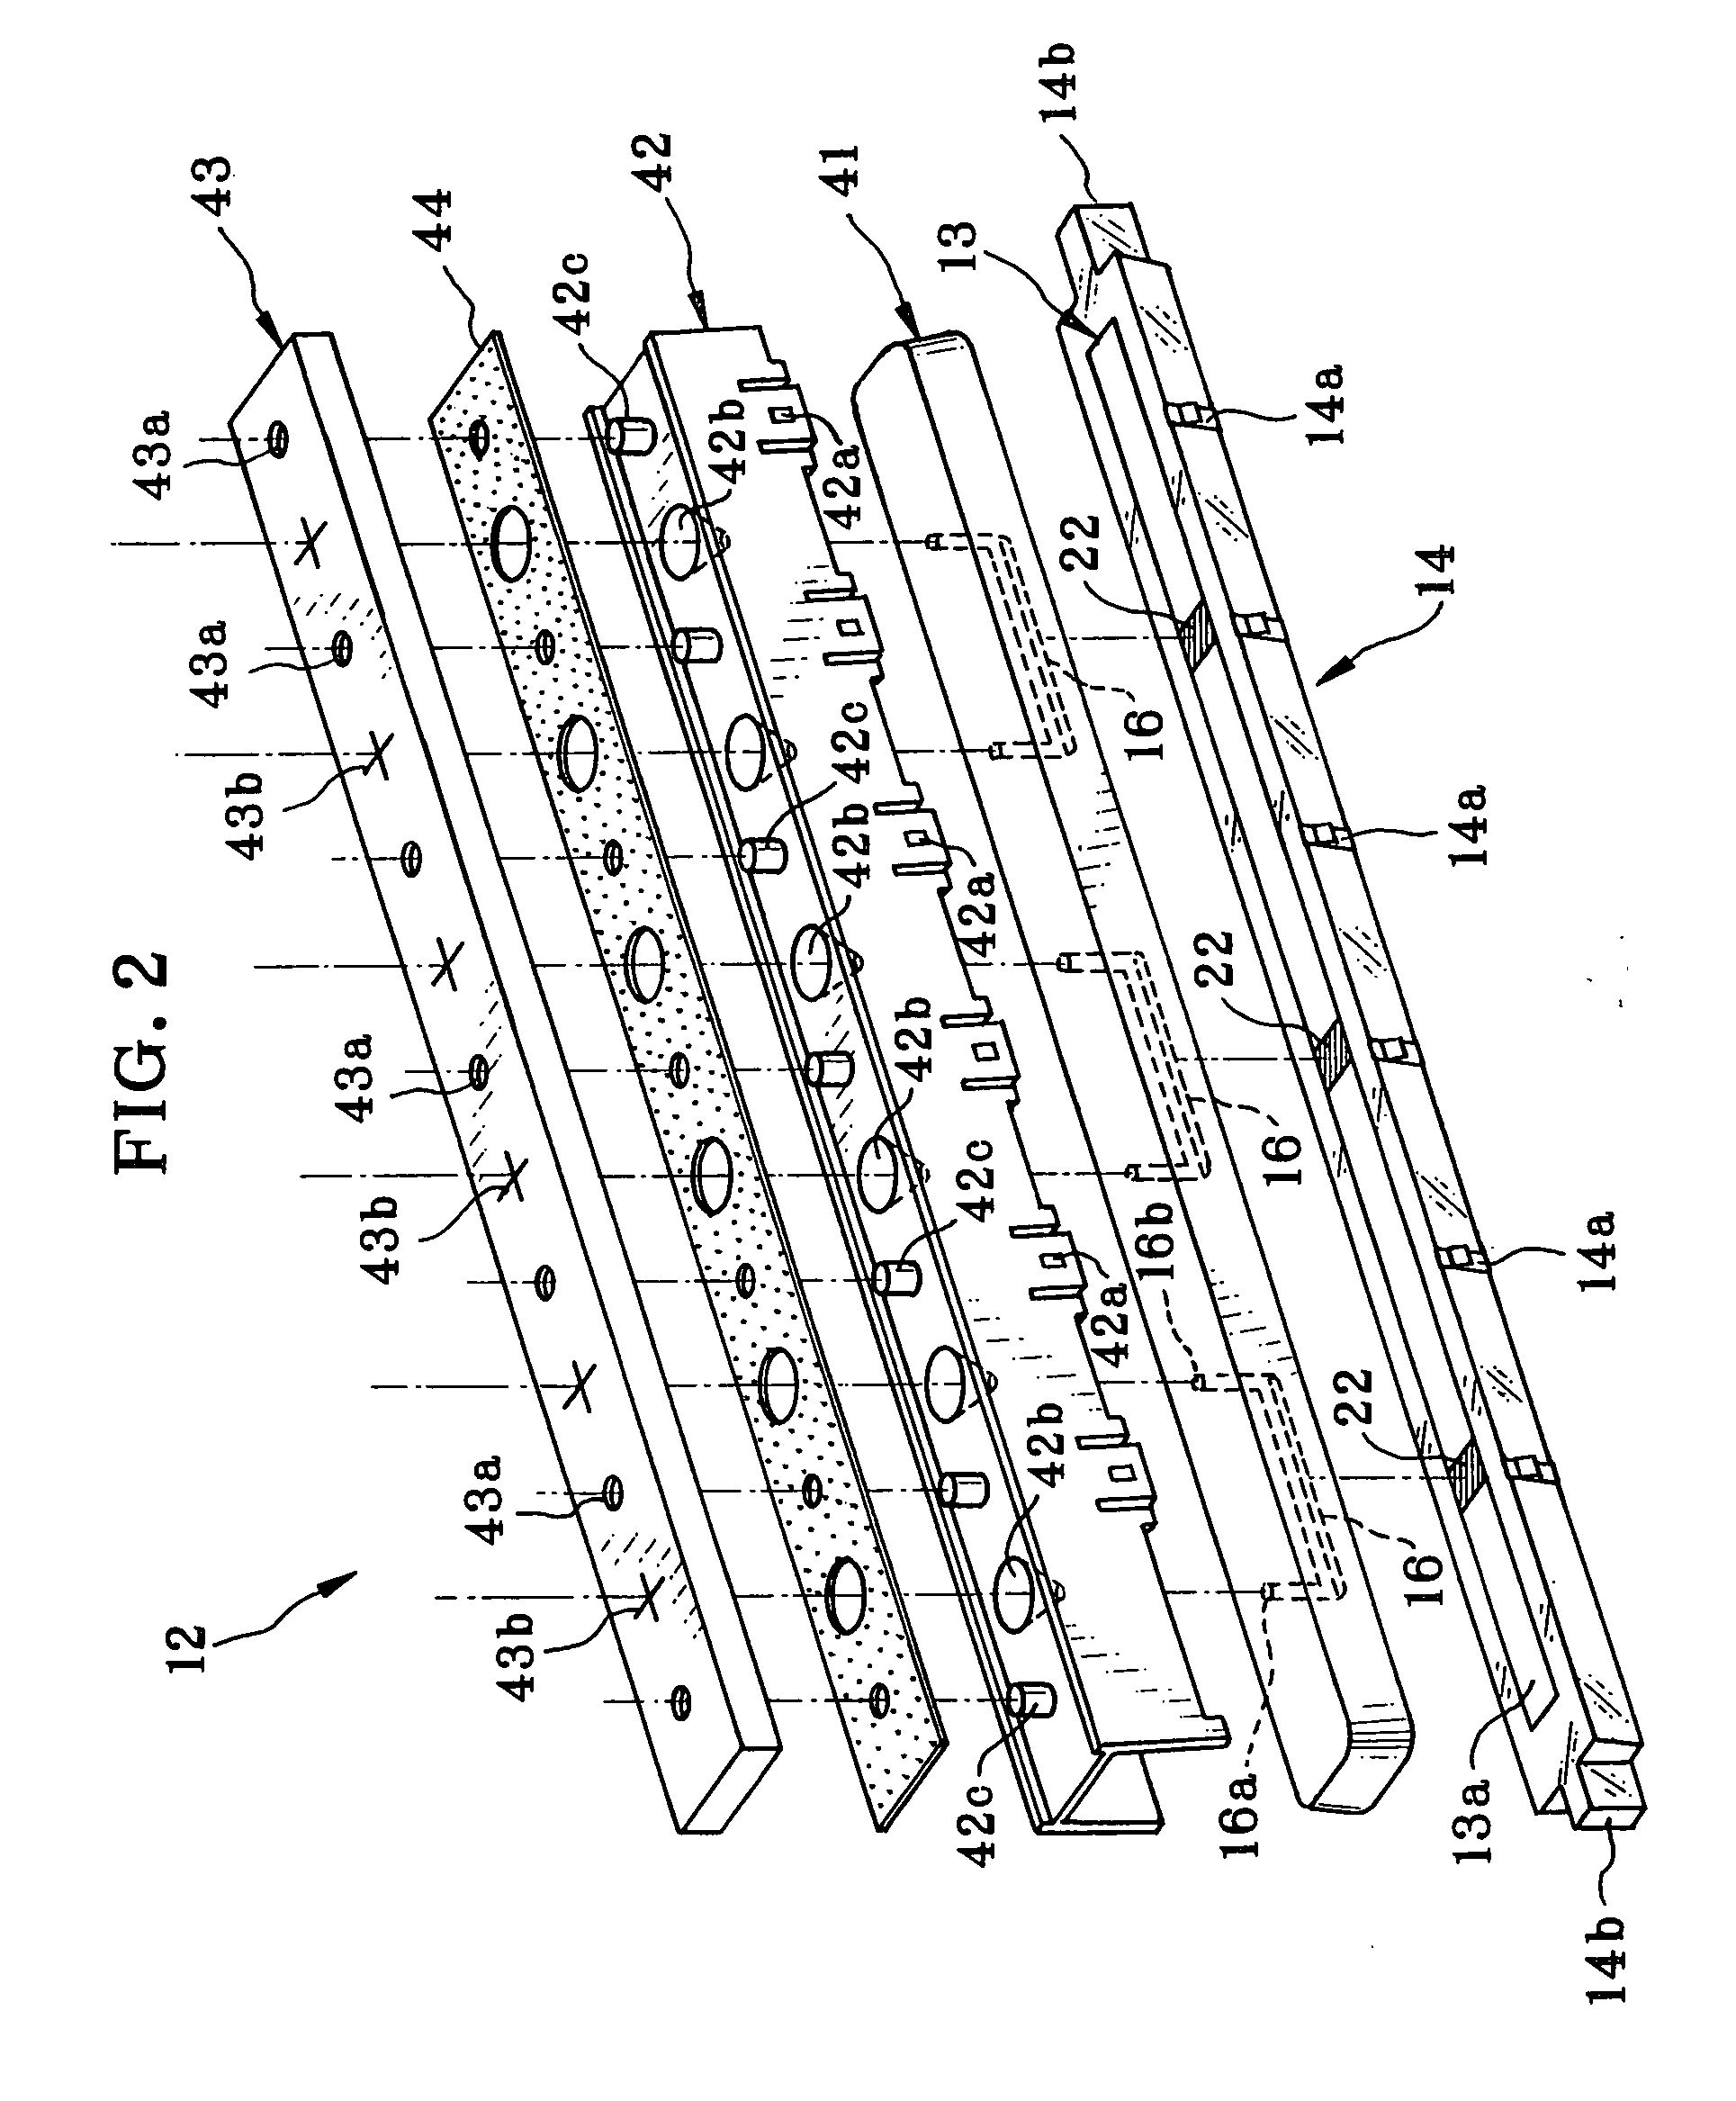 Method and apparatus for assay in utilizing attenuated total reflection, and sample immobilizing device